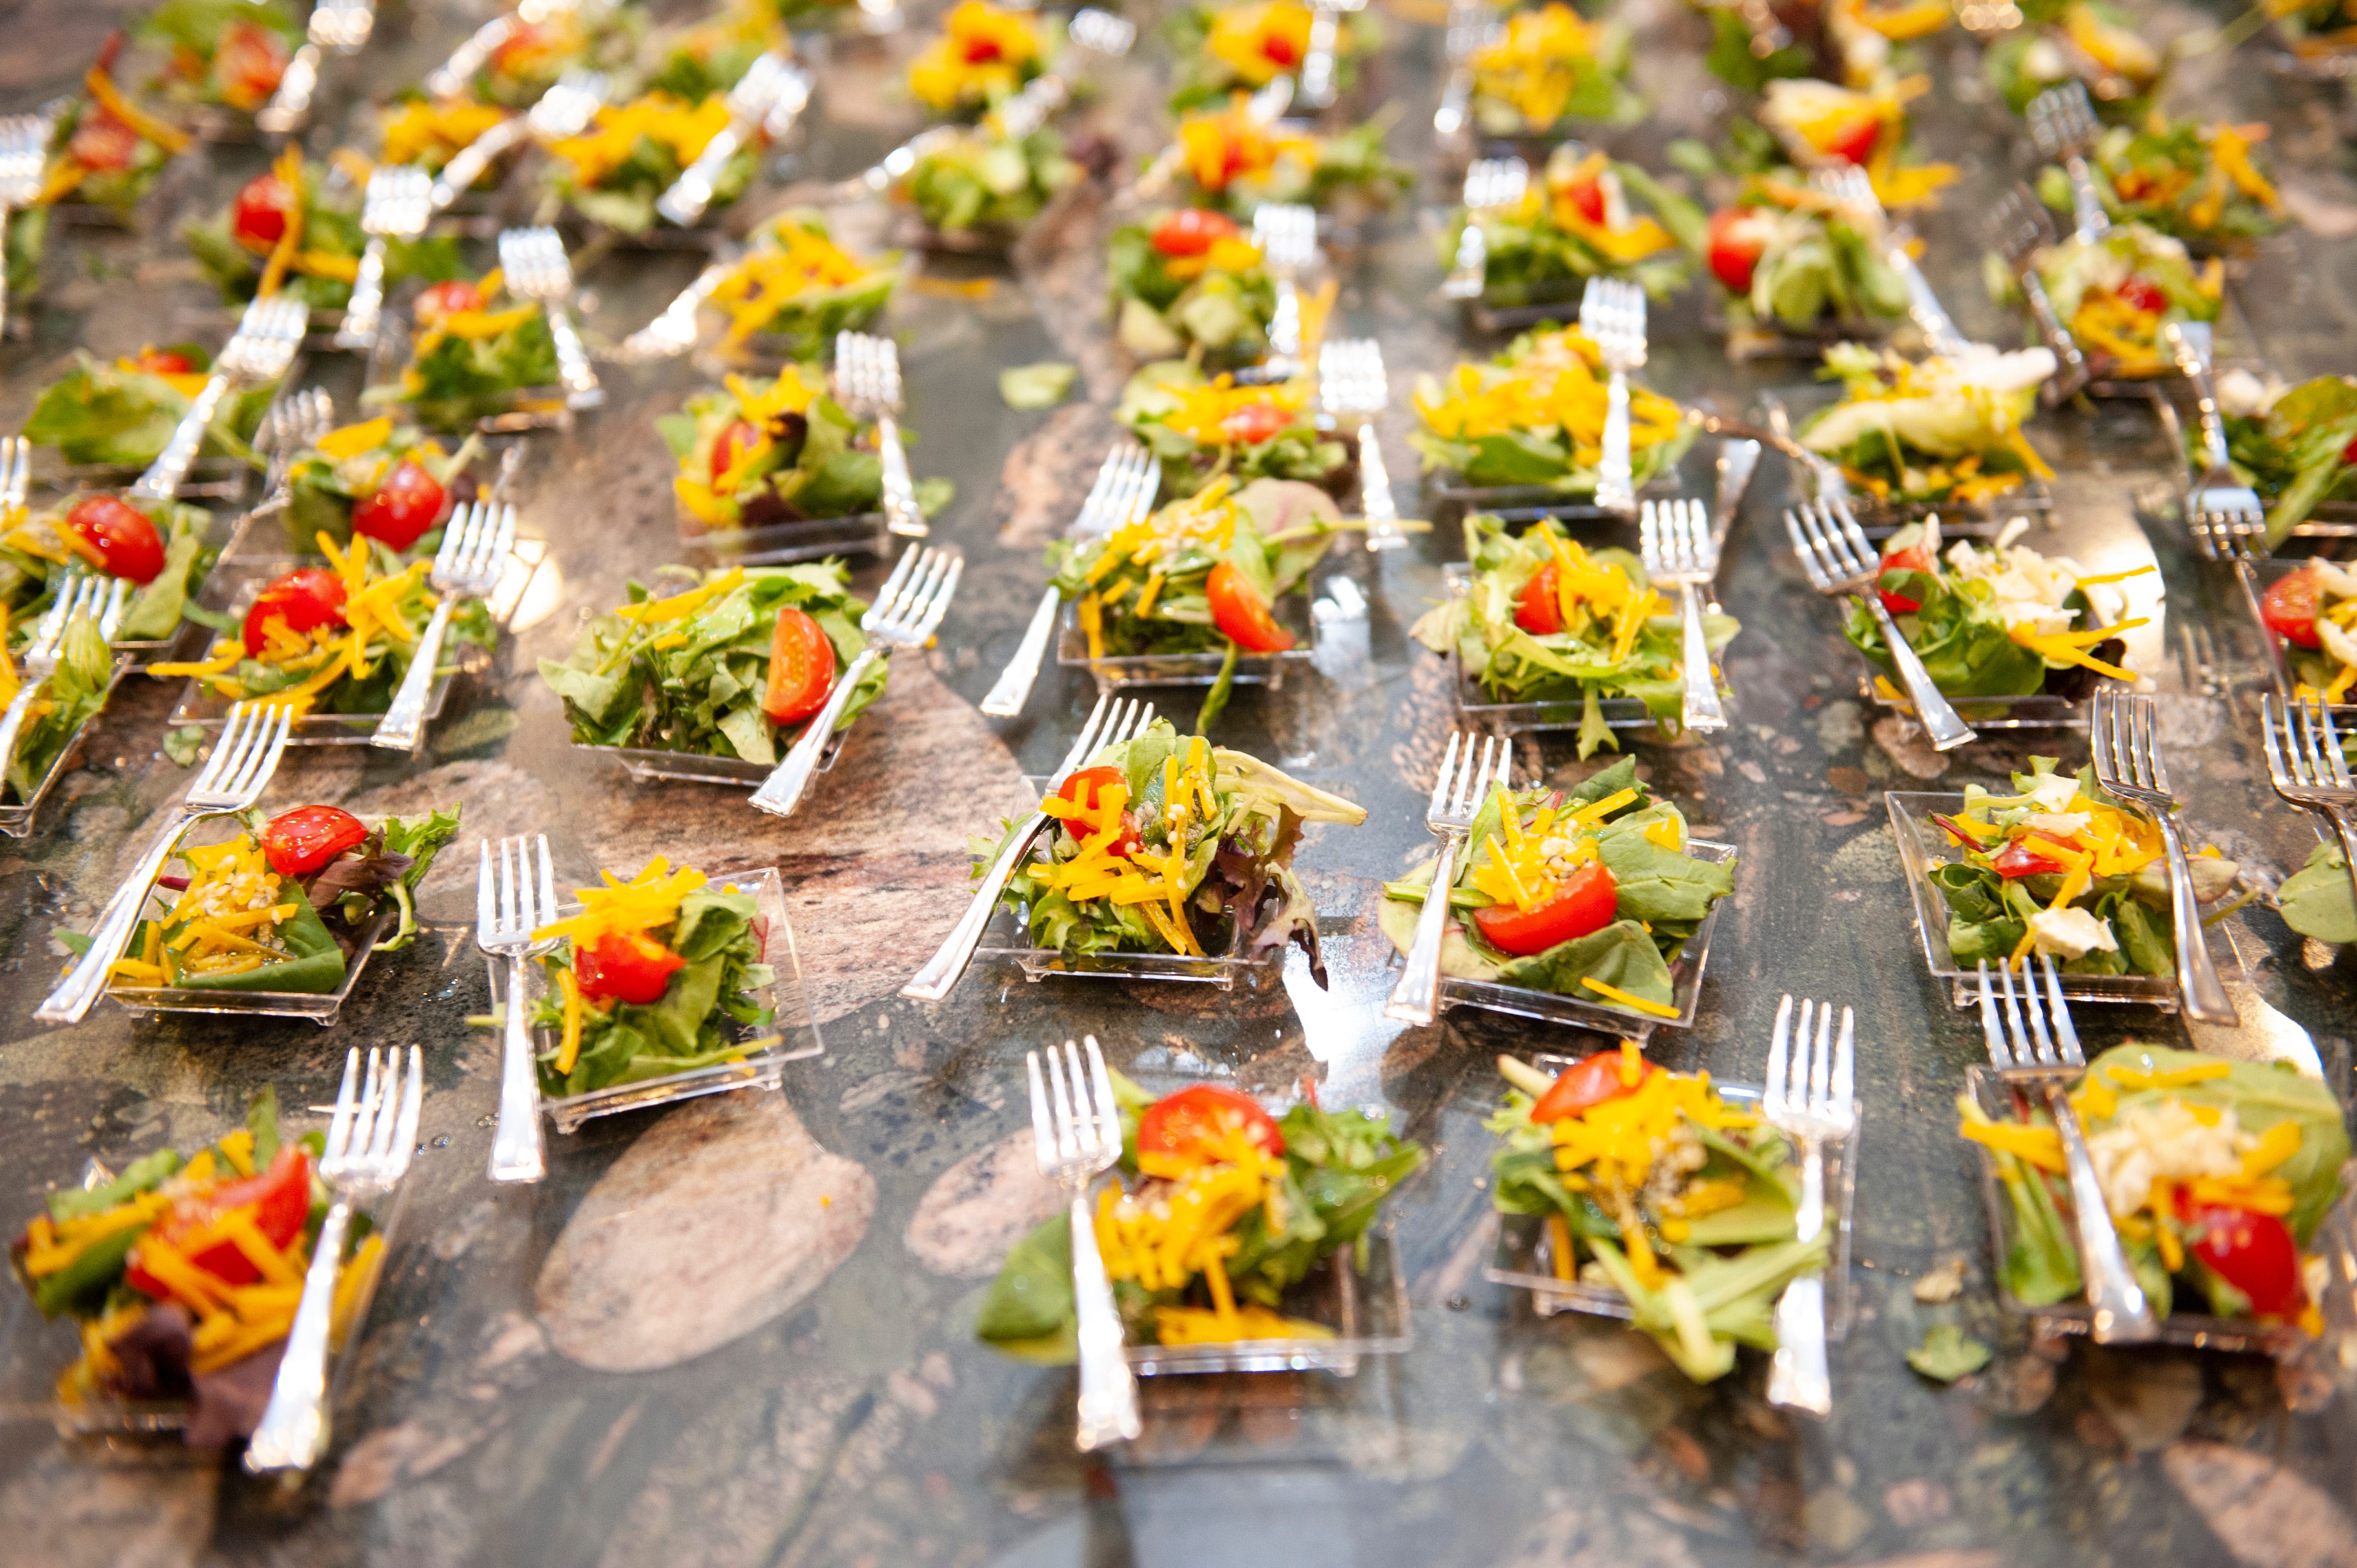 Cannabis-infused salad appetizers by Chef Gigi Diaz are displayed as free samples for guests to enjoy.